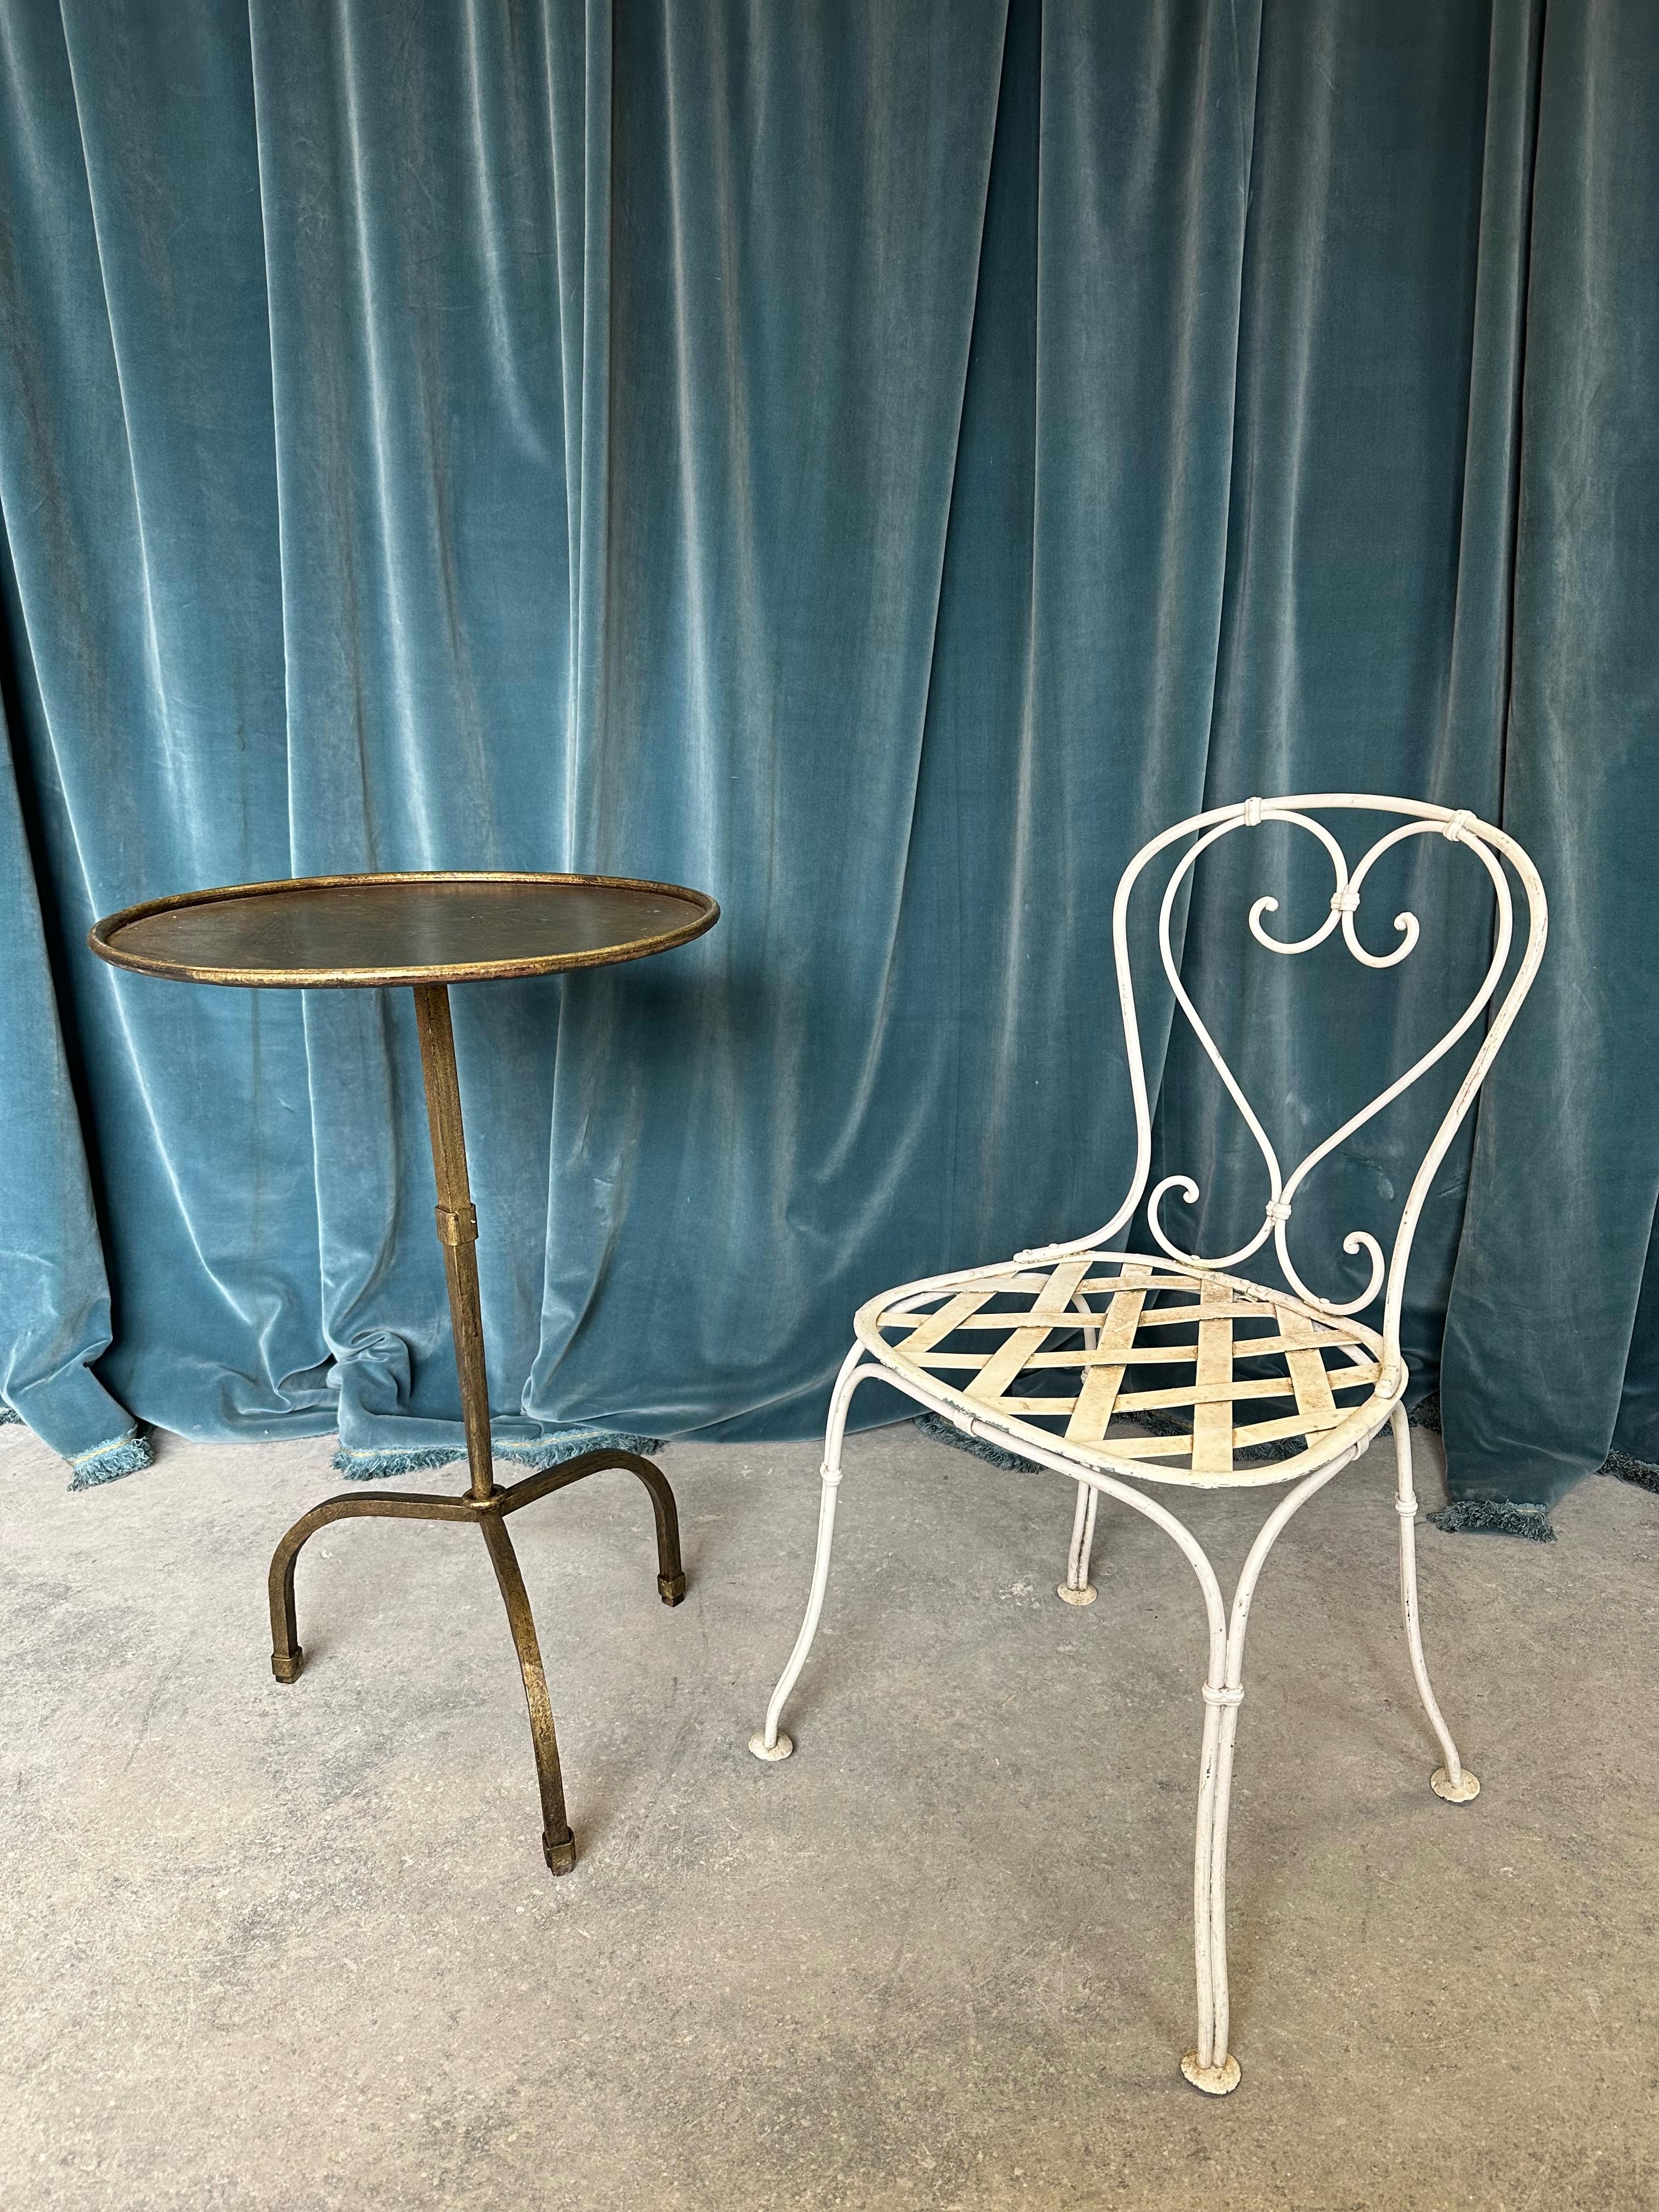 This recently crafted small Spanish iron end table is not only elegant but functional.  The small scaled side table, or better yet a drinks table, stands out with a circular central stem, highlighted by an intriguing collar accent that serves as a